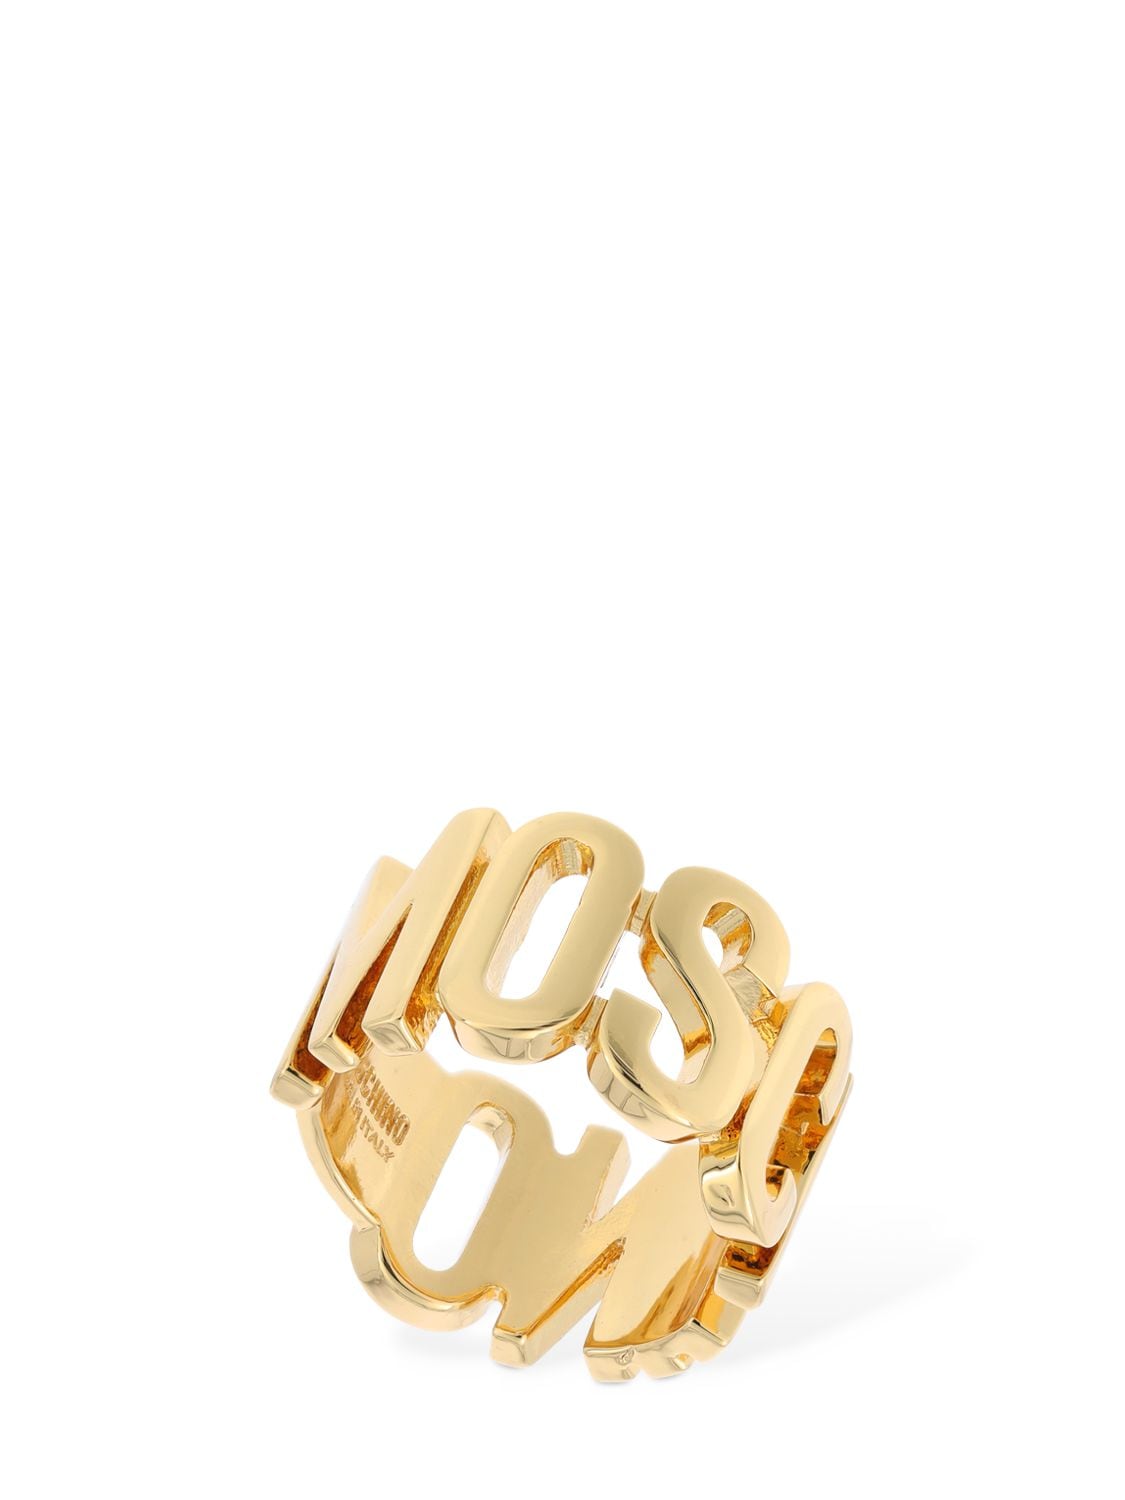 MOSCHINO LOGO LETTERING BAND RING